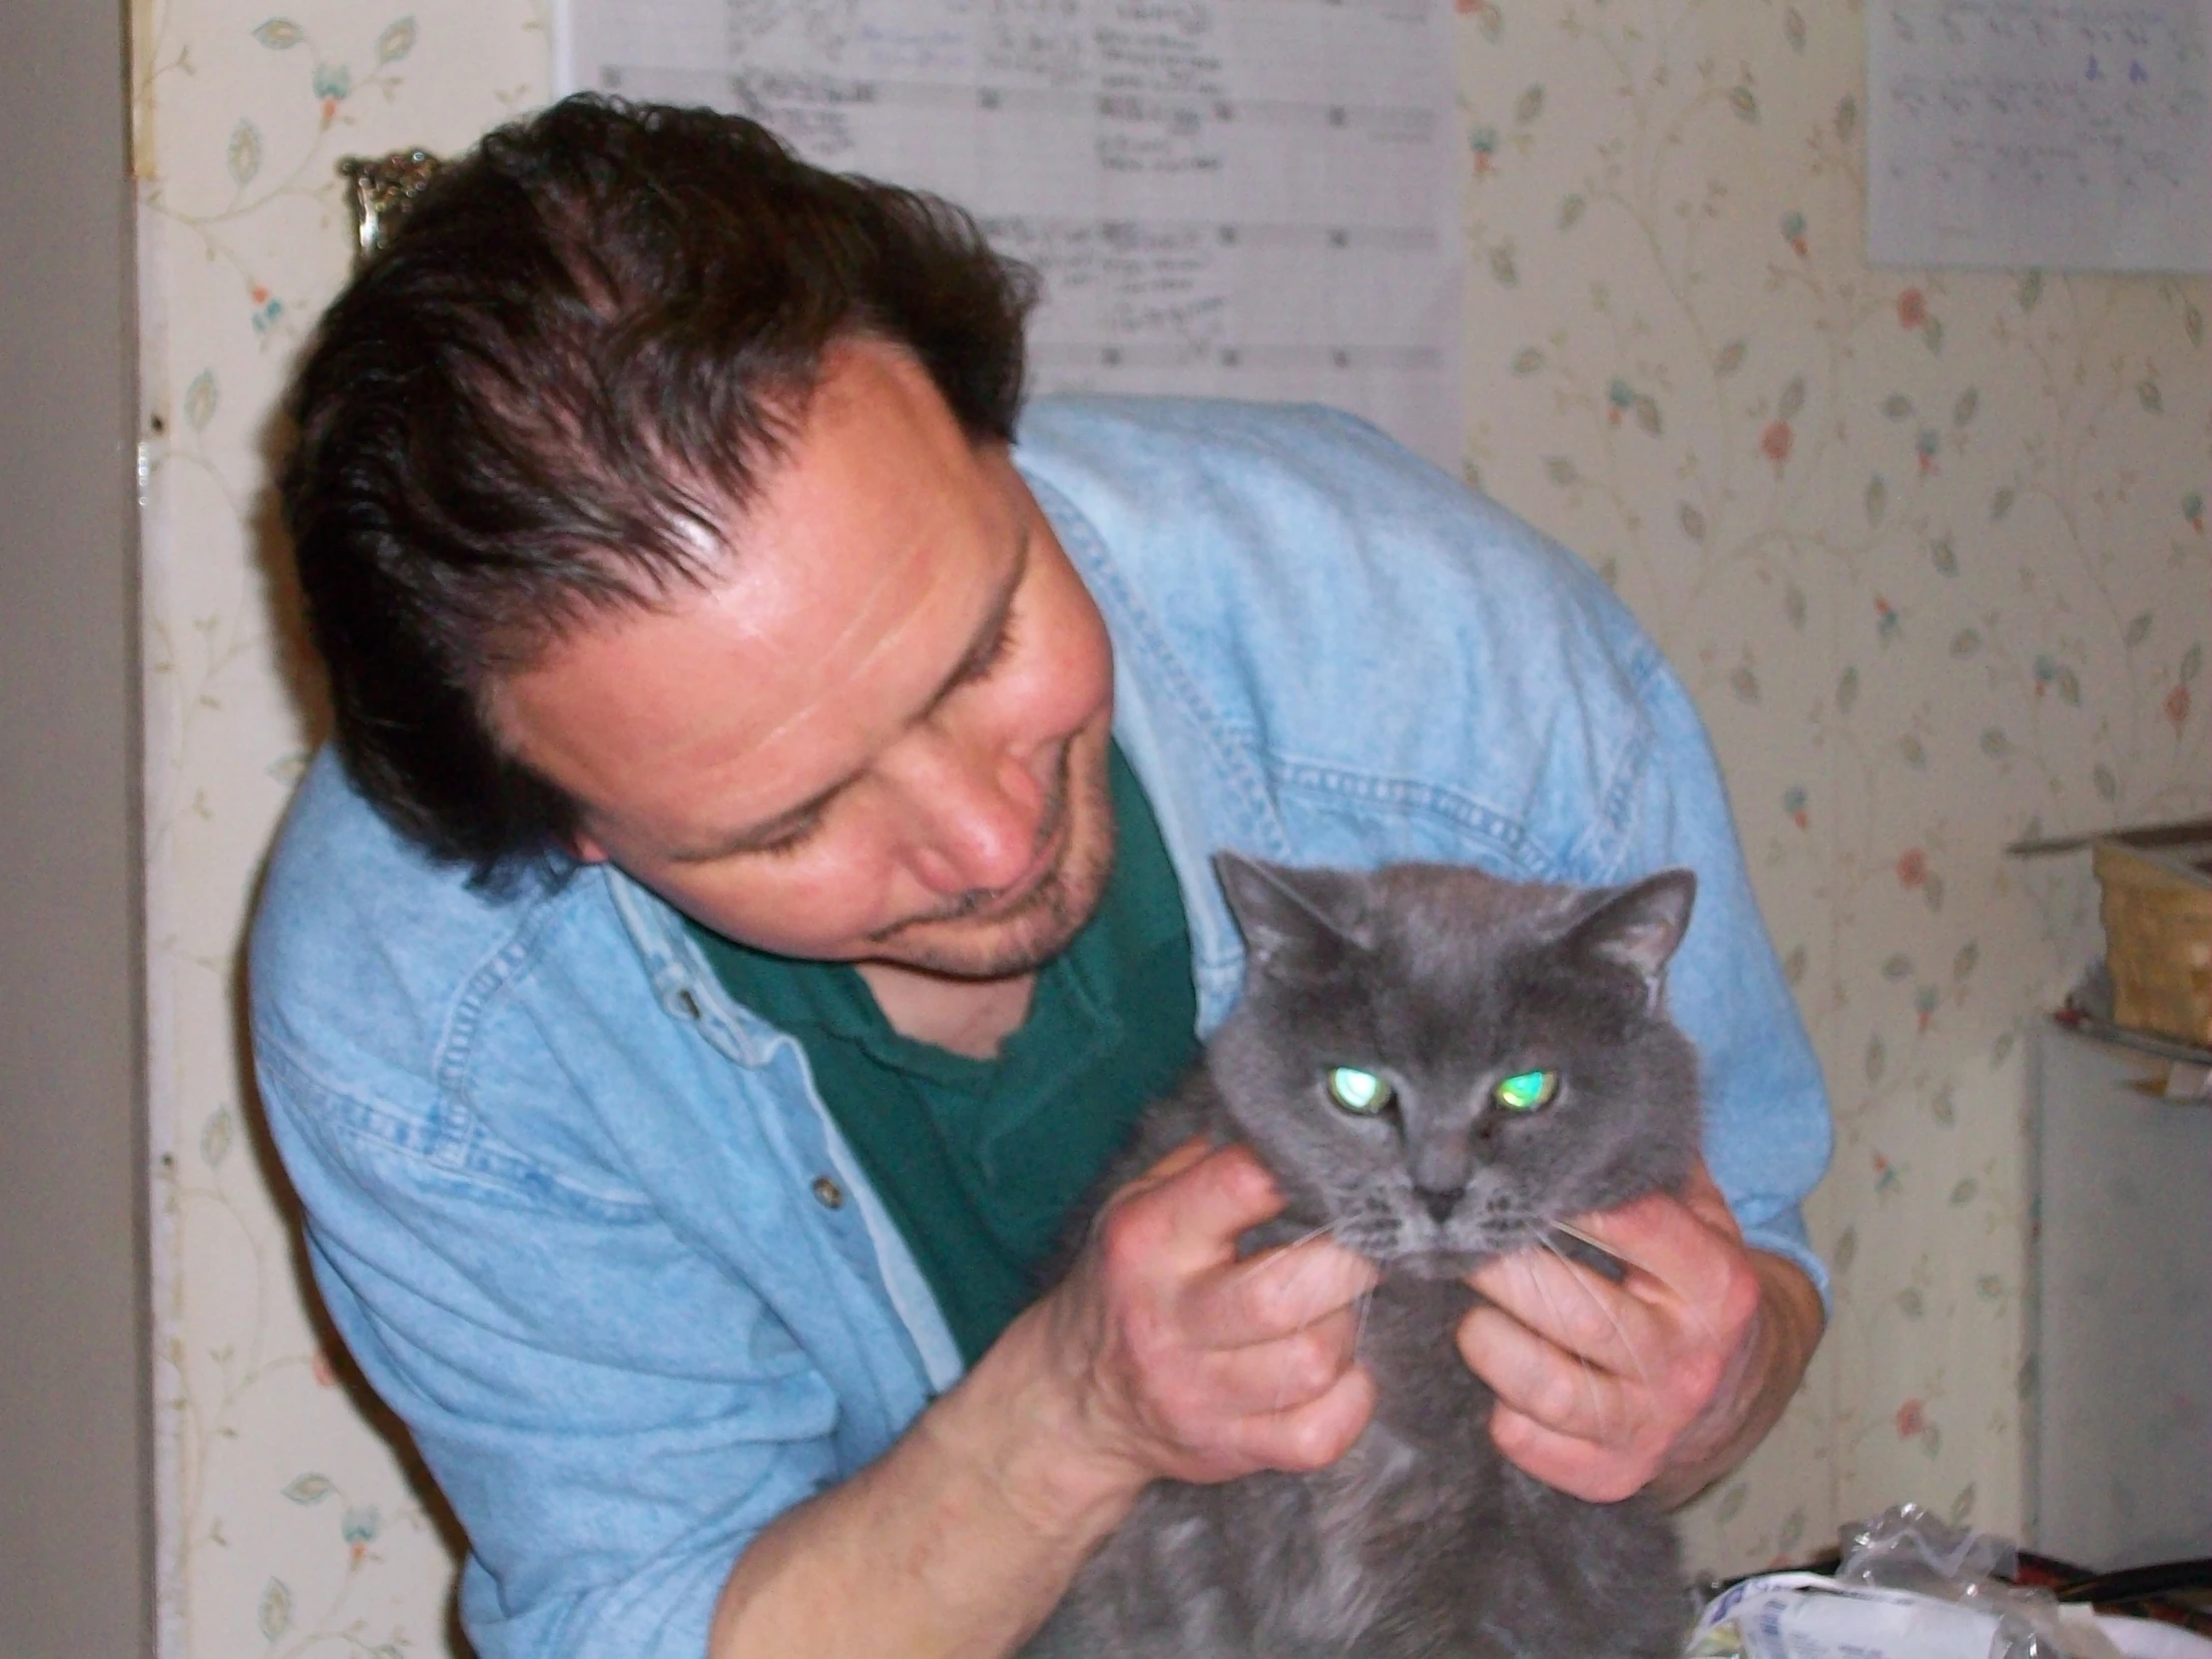 man holding a cat with one green eyes